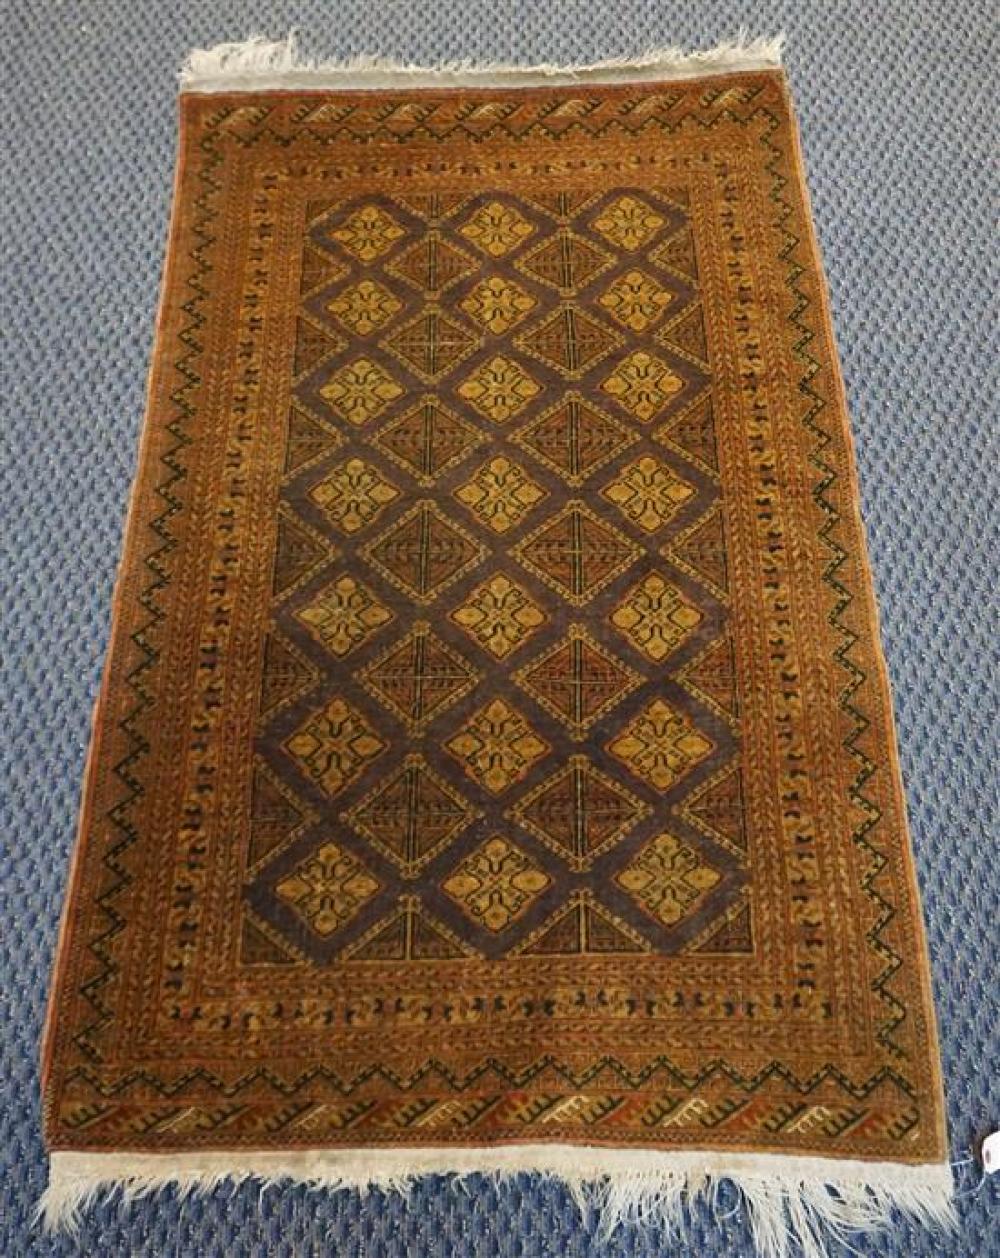 TURKOMAN RUG, 5 FT 5 IN X 3 FT